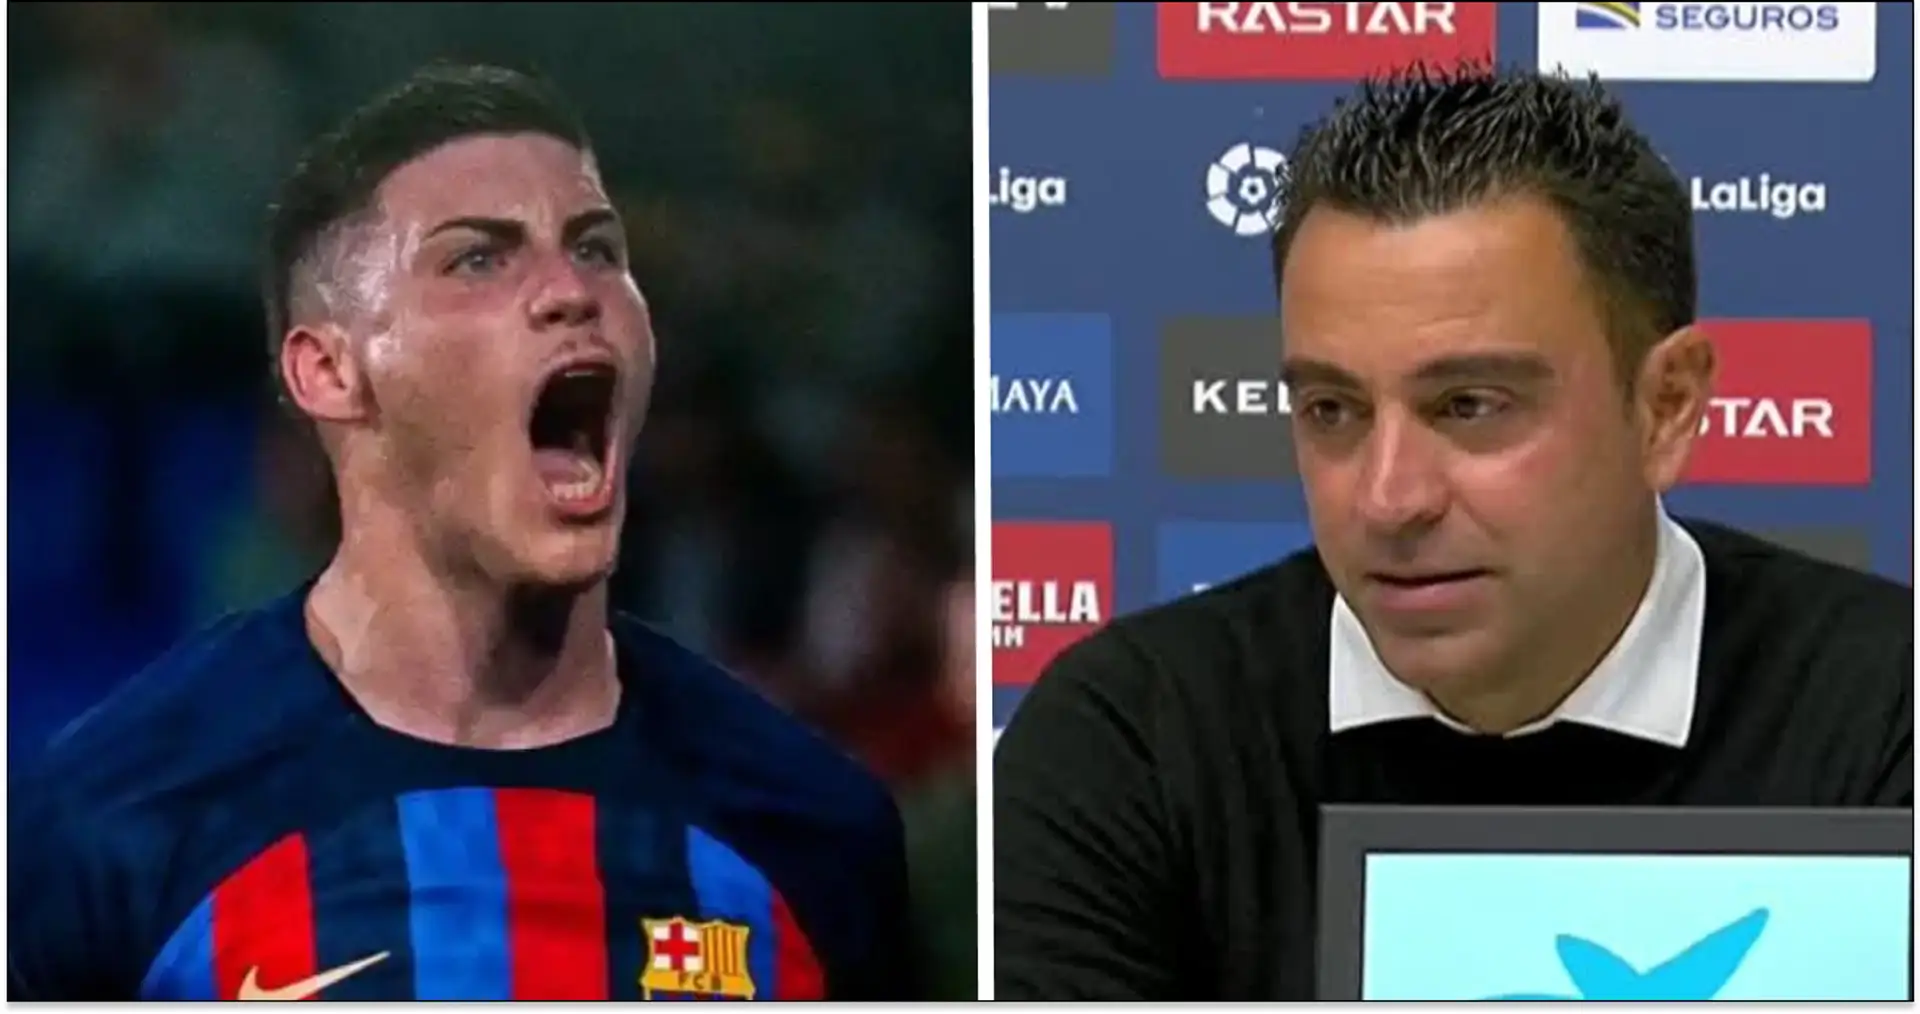 Explained: How Barca beating Celta could help Barca Athletic win Segunda promotion